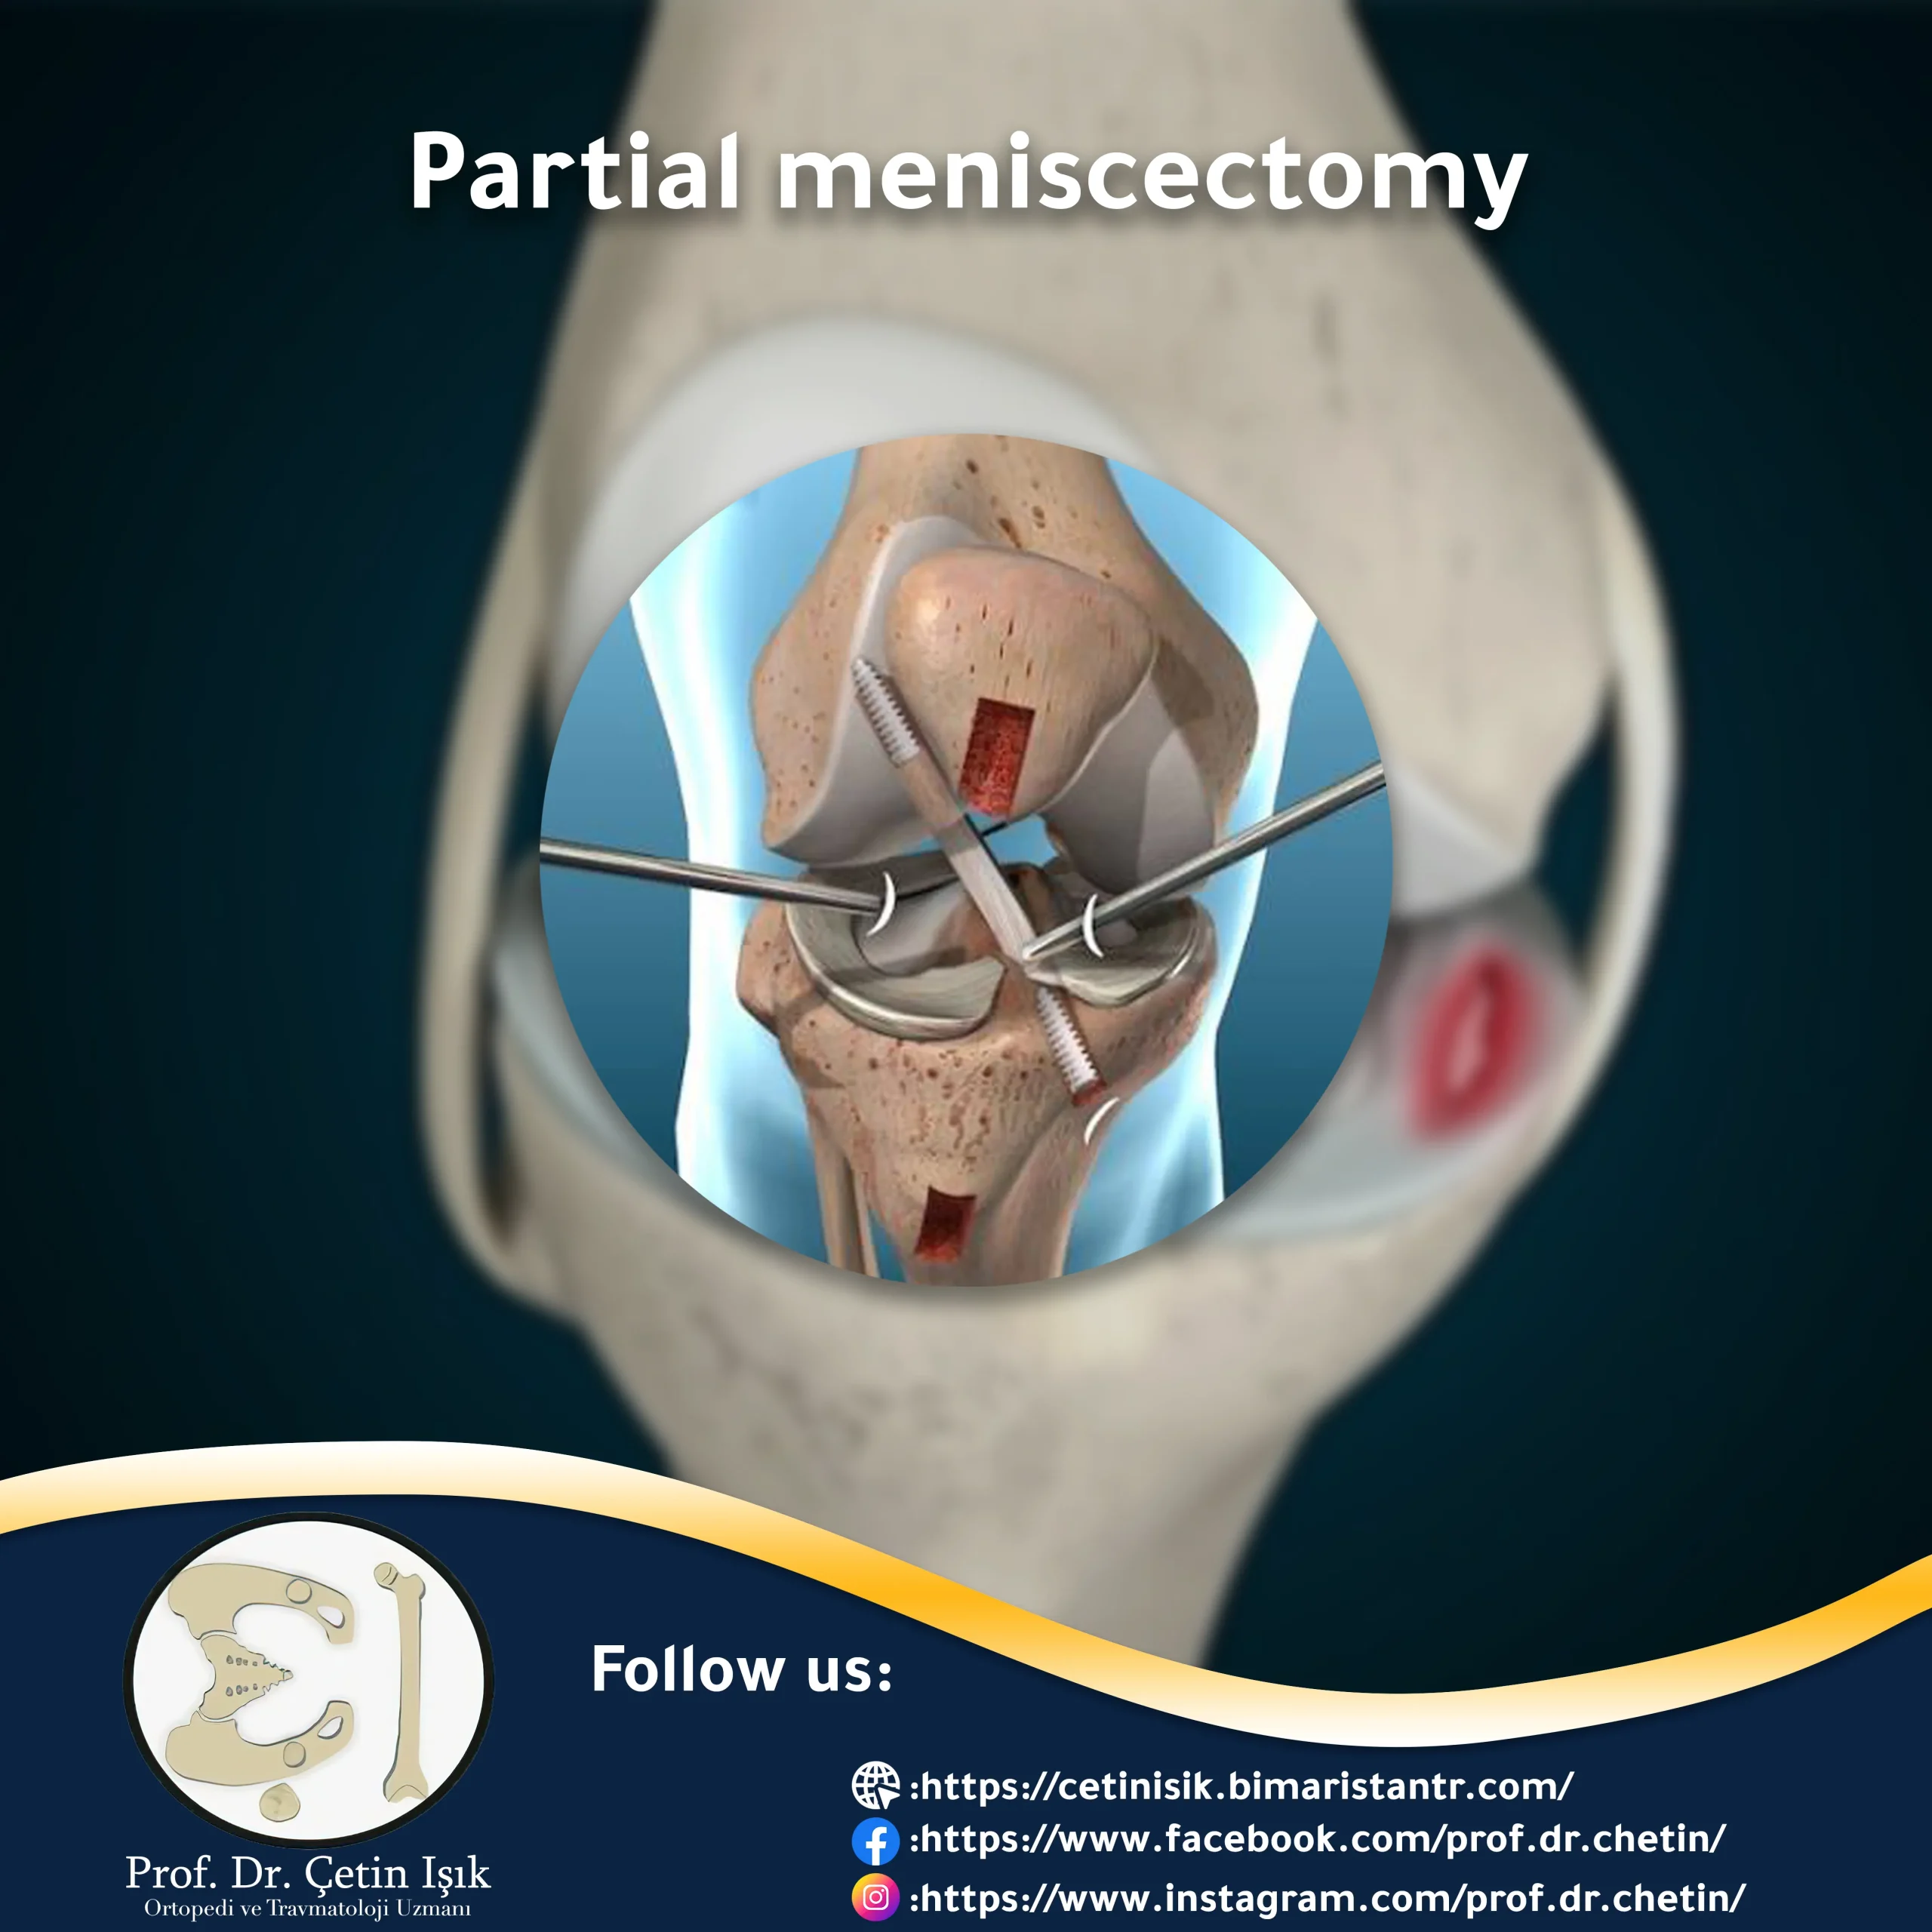 Image of knee meniscus resection, which is usually done arthroscopically and is a quick, non-invasive procedure